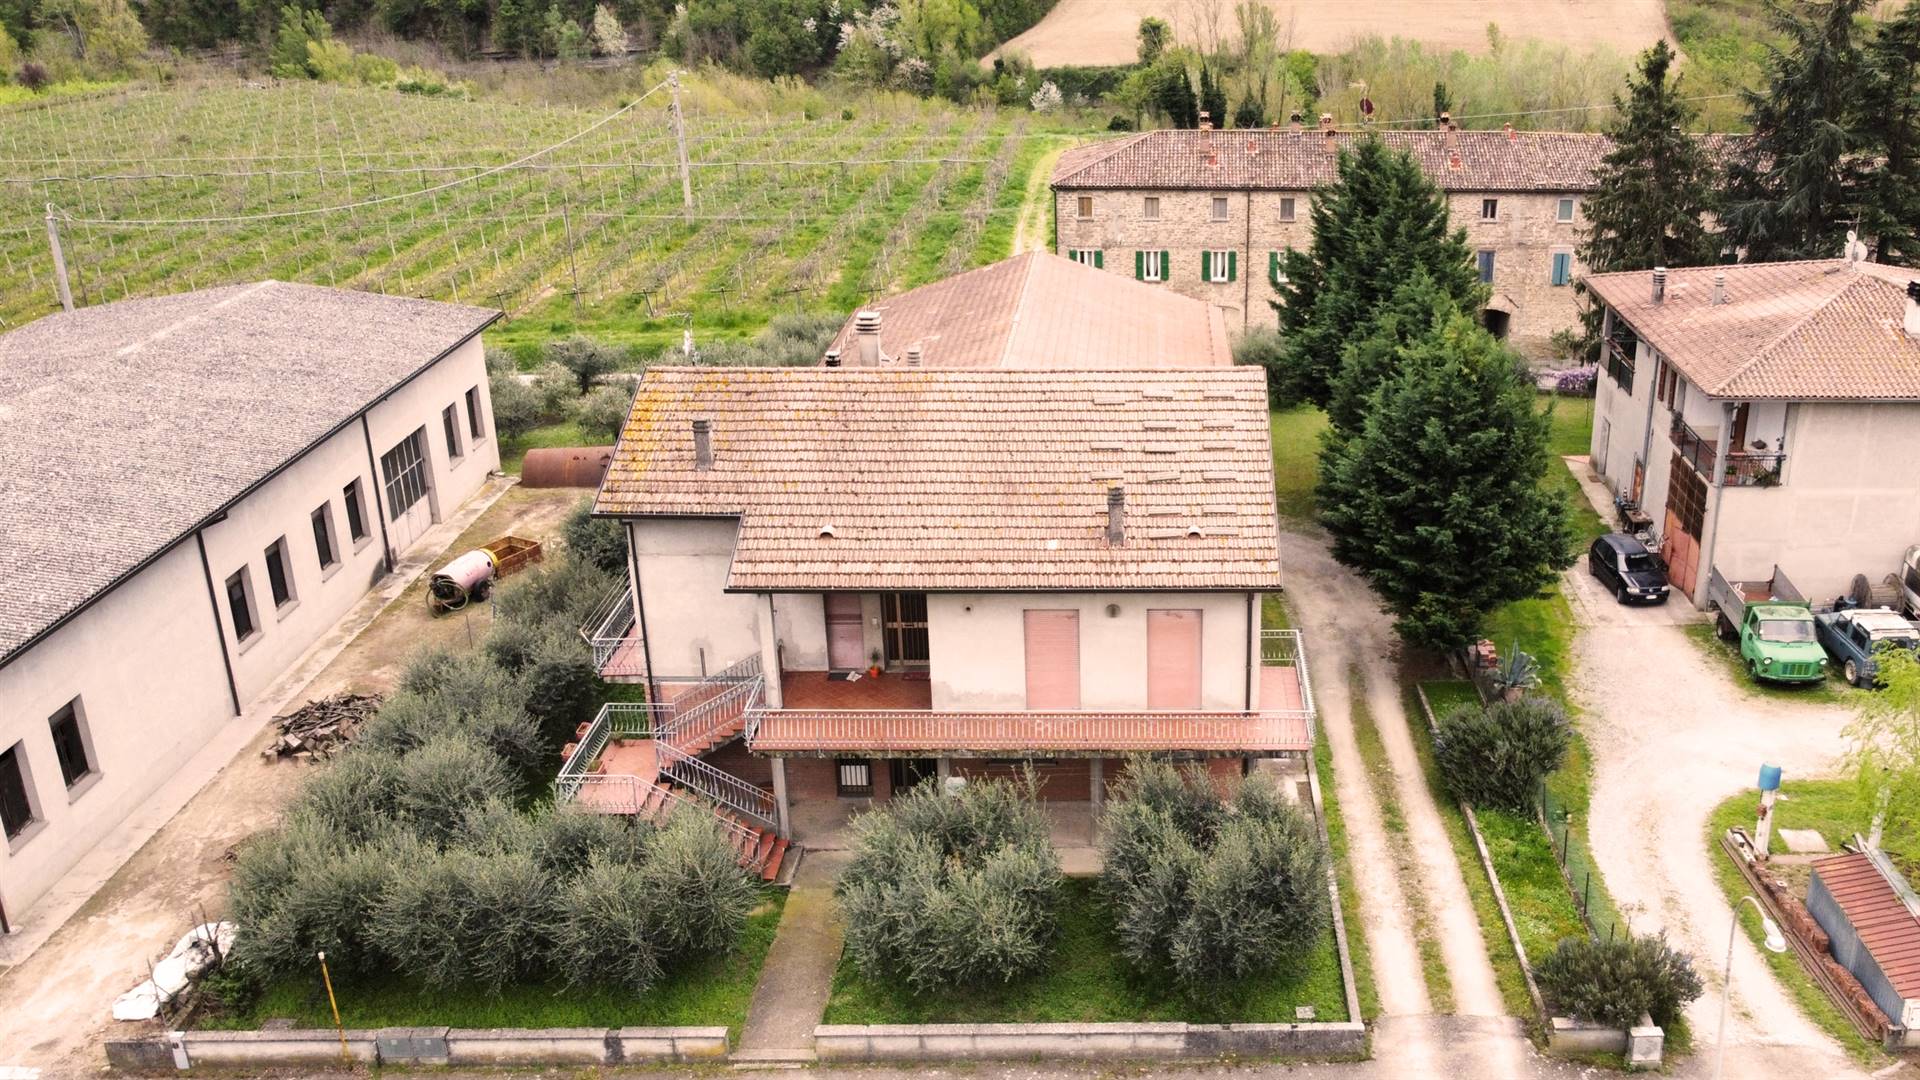 CASTELLINA, BRISIGHELLA, Detached house for sale of 800 Sq. mt., Quite good conditions, Heating Individual heating system, Energetic class: G, placed 